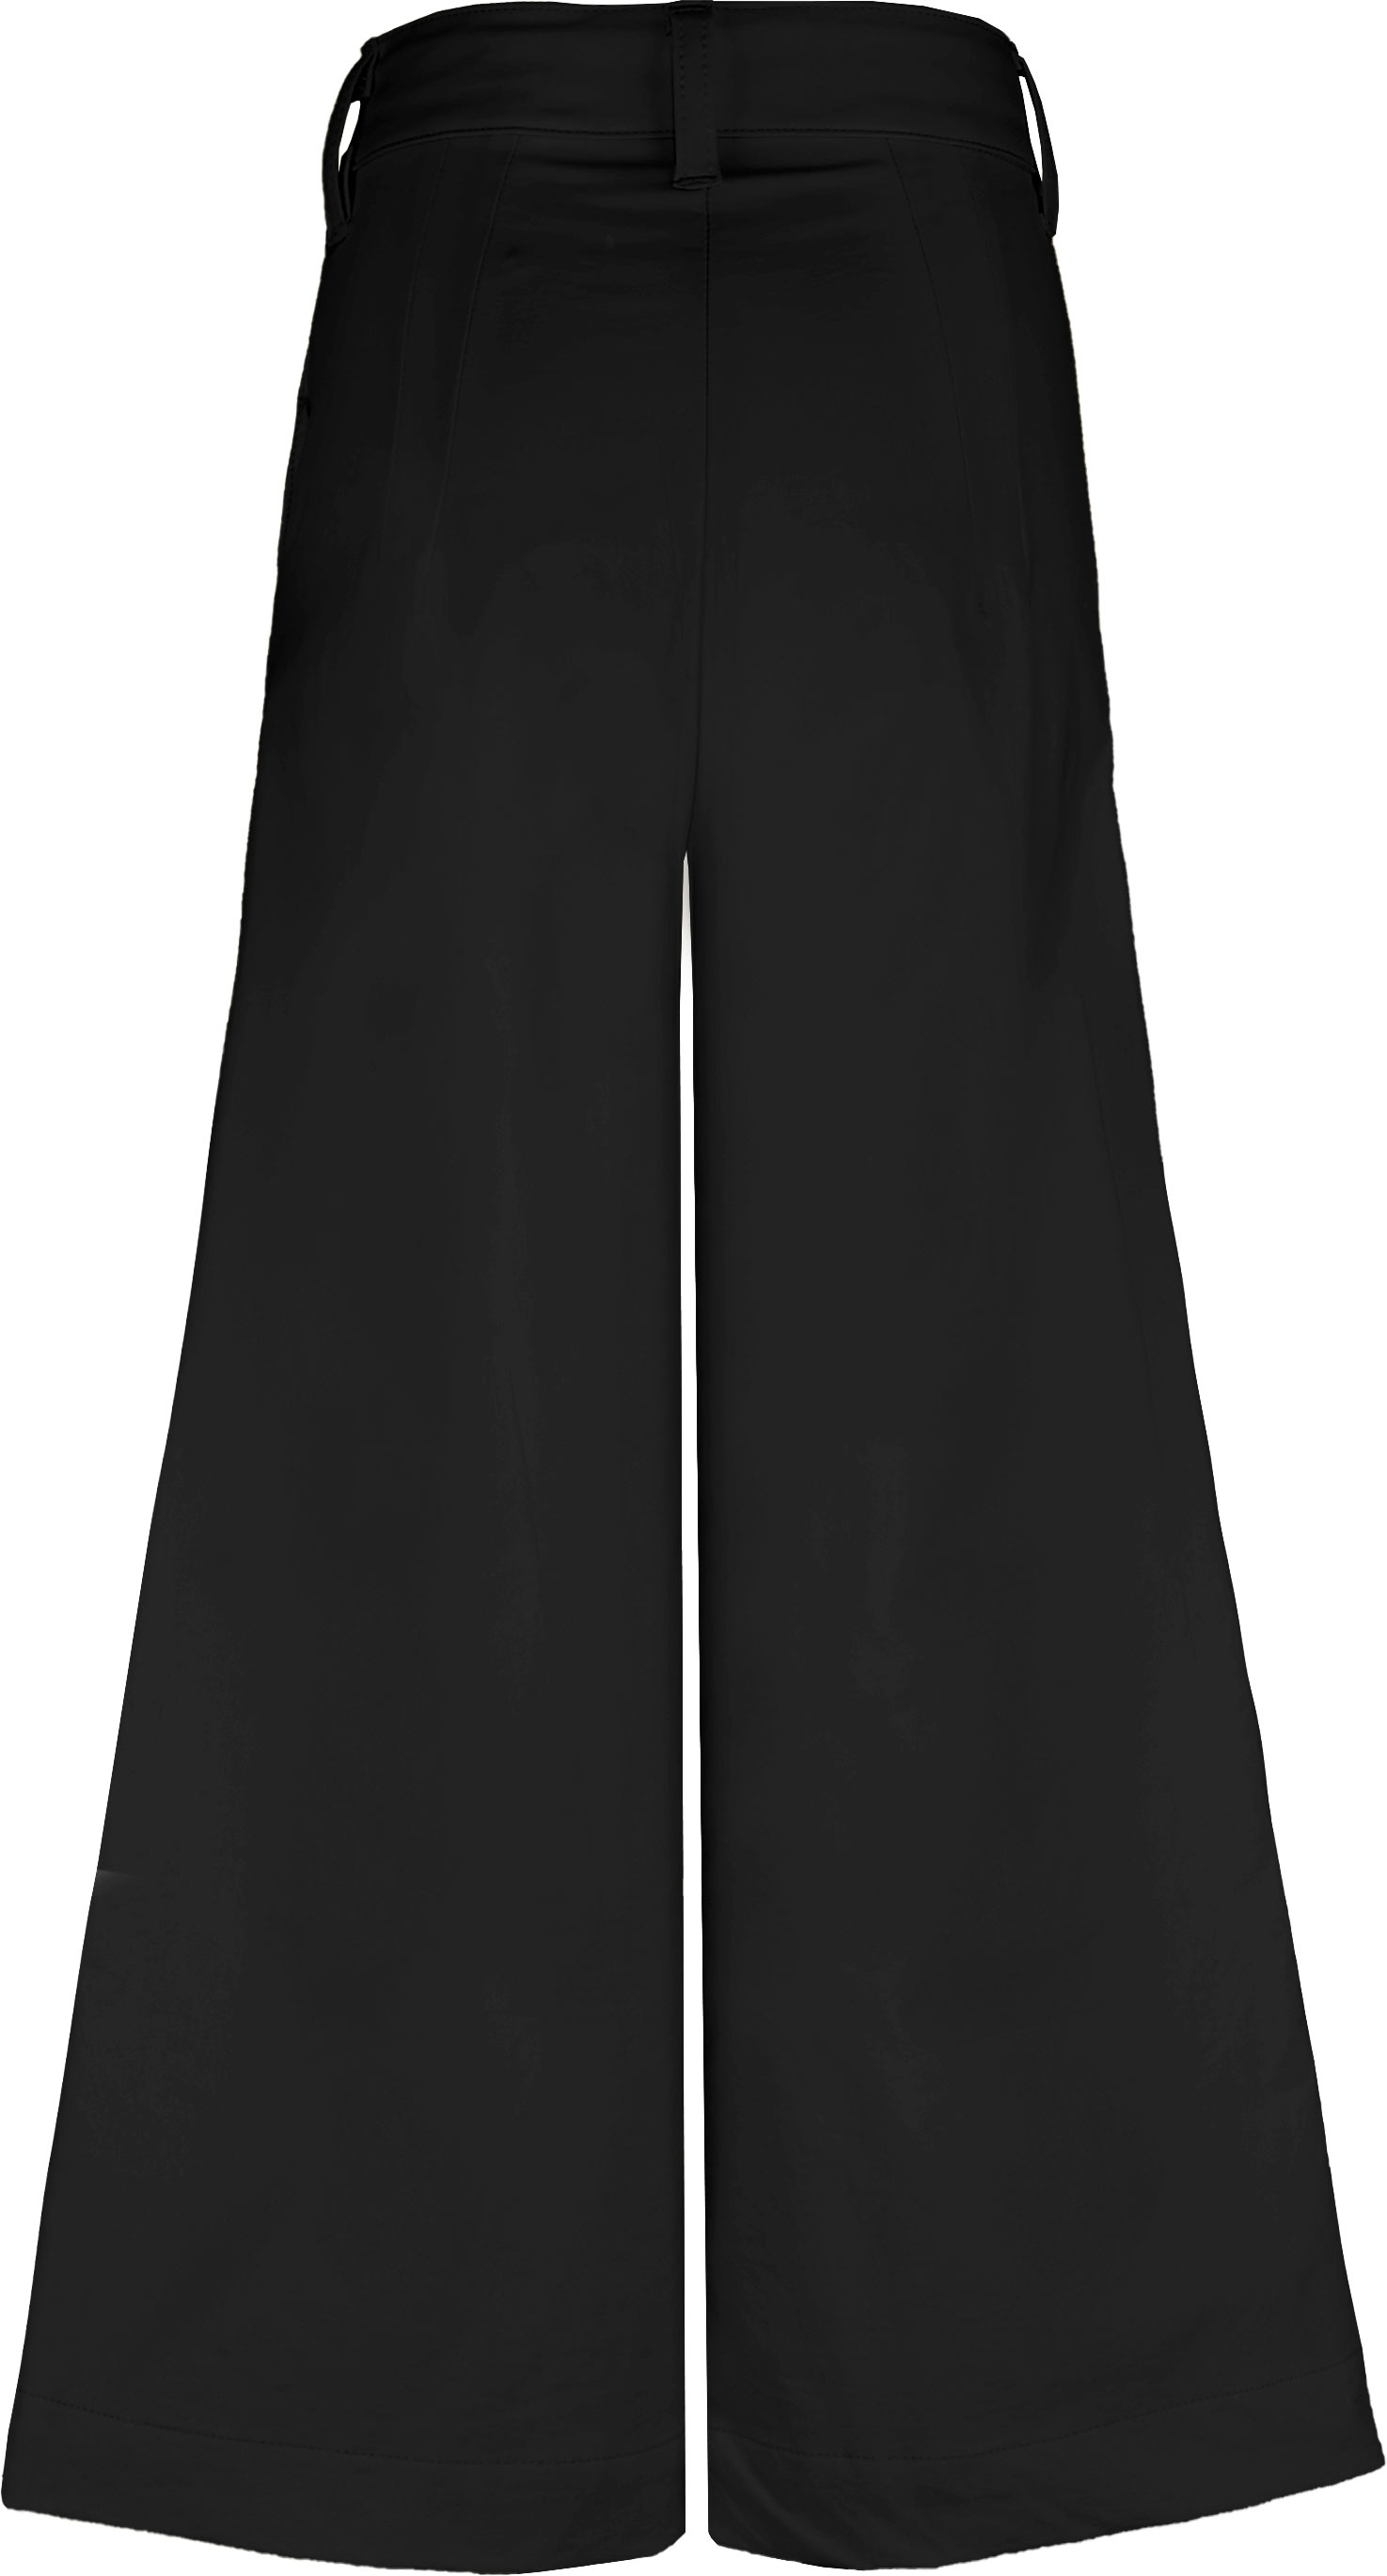 1371-Girls Cropped Culotte available in Slim, Normal